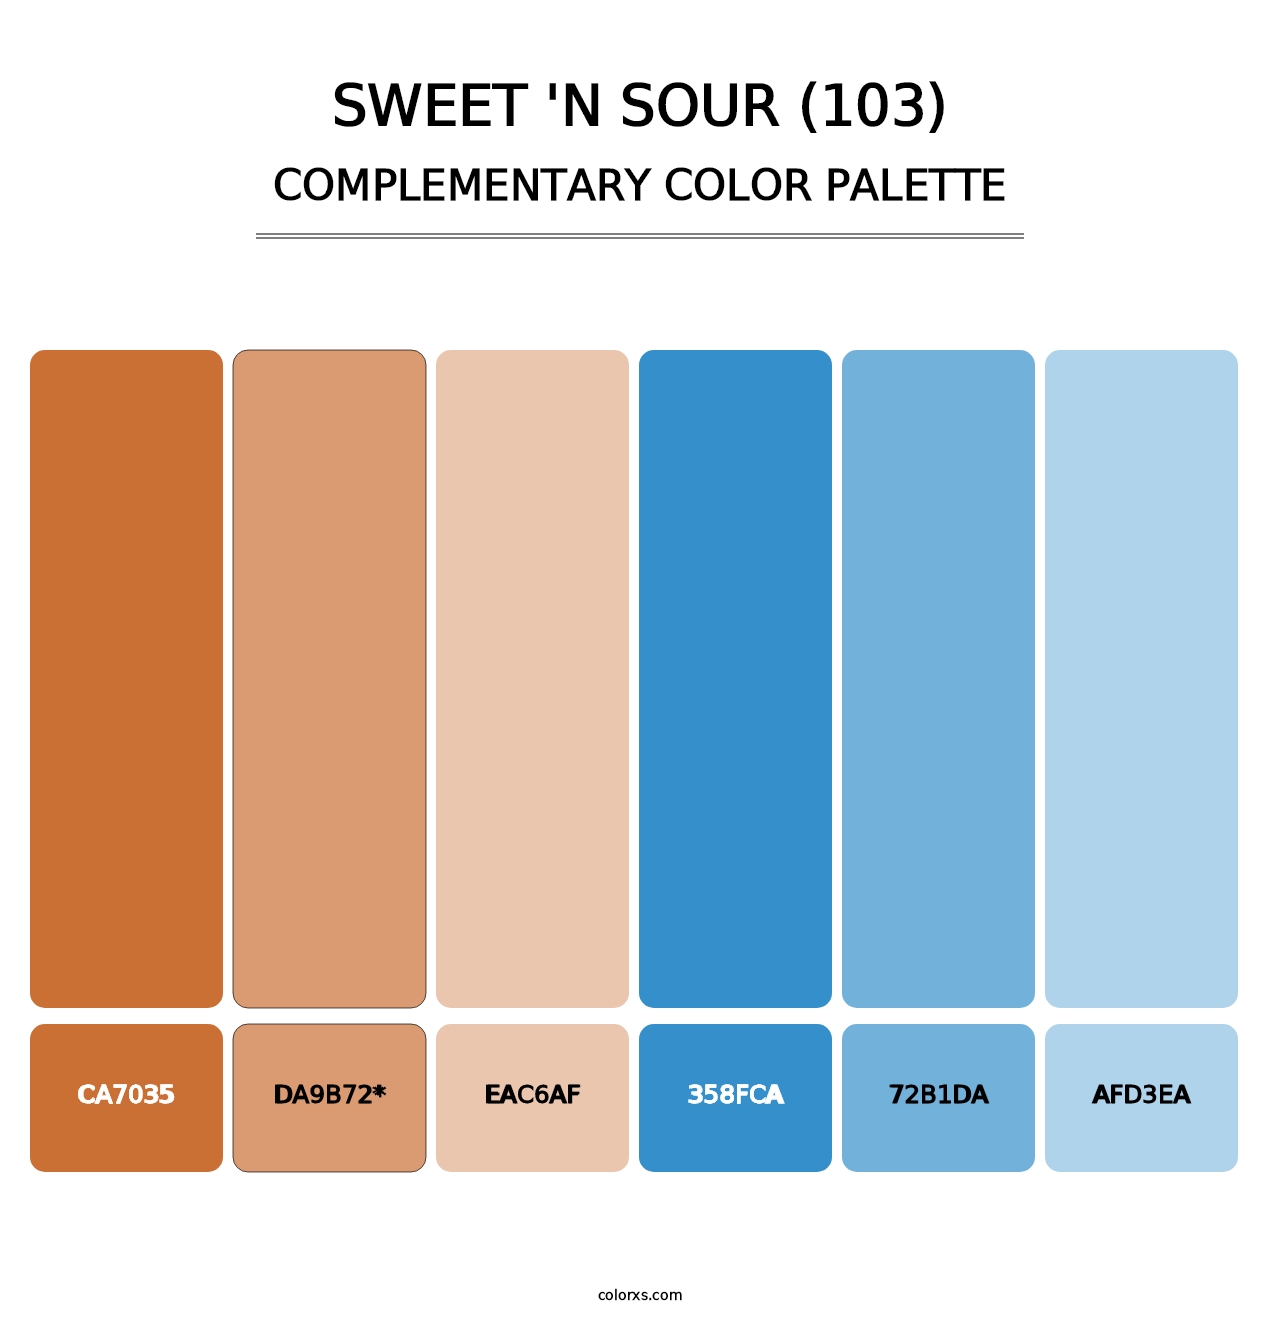 Sweet 'n Sour (103) - Complementary Color Palette